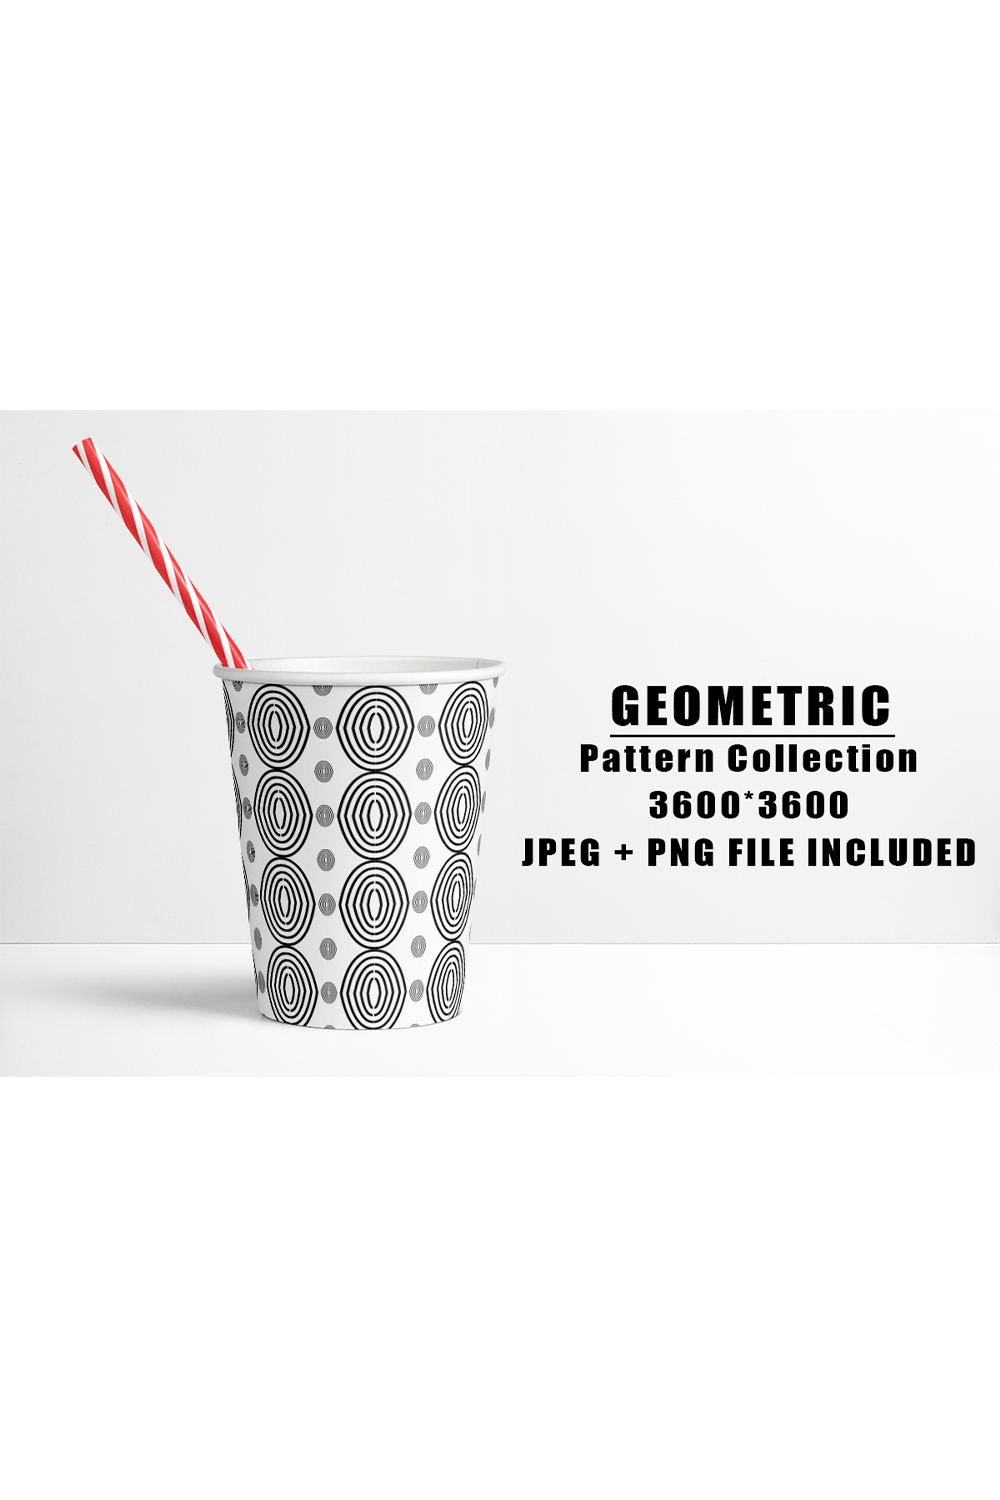 Image of a paper cup with exquisite geometric patterns